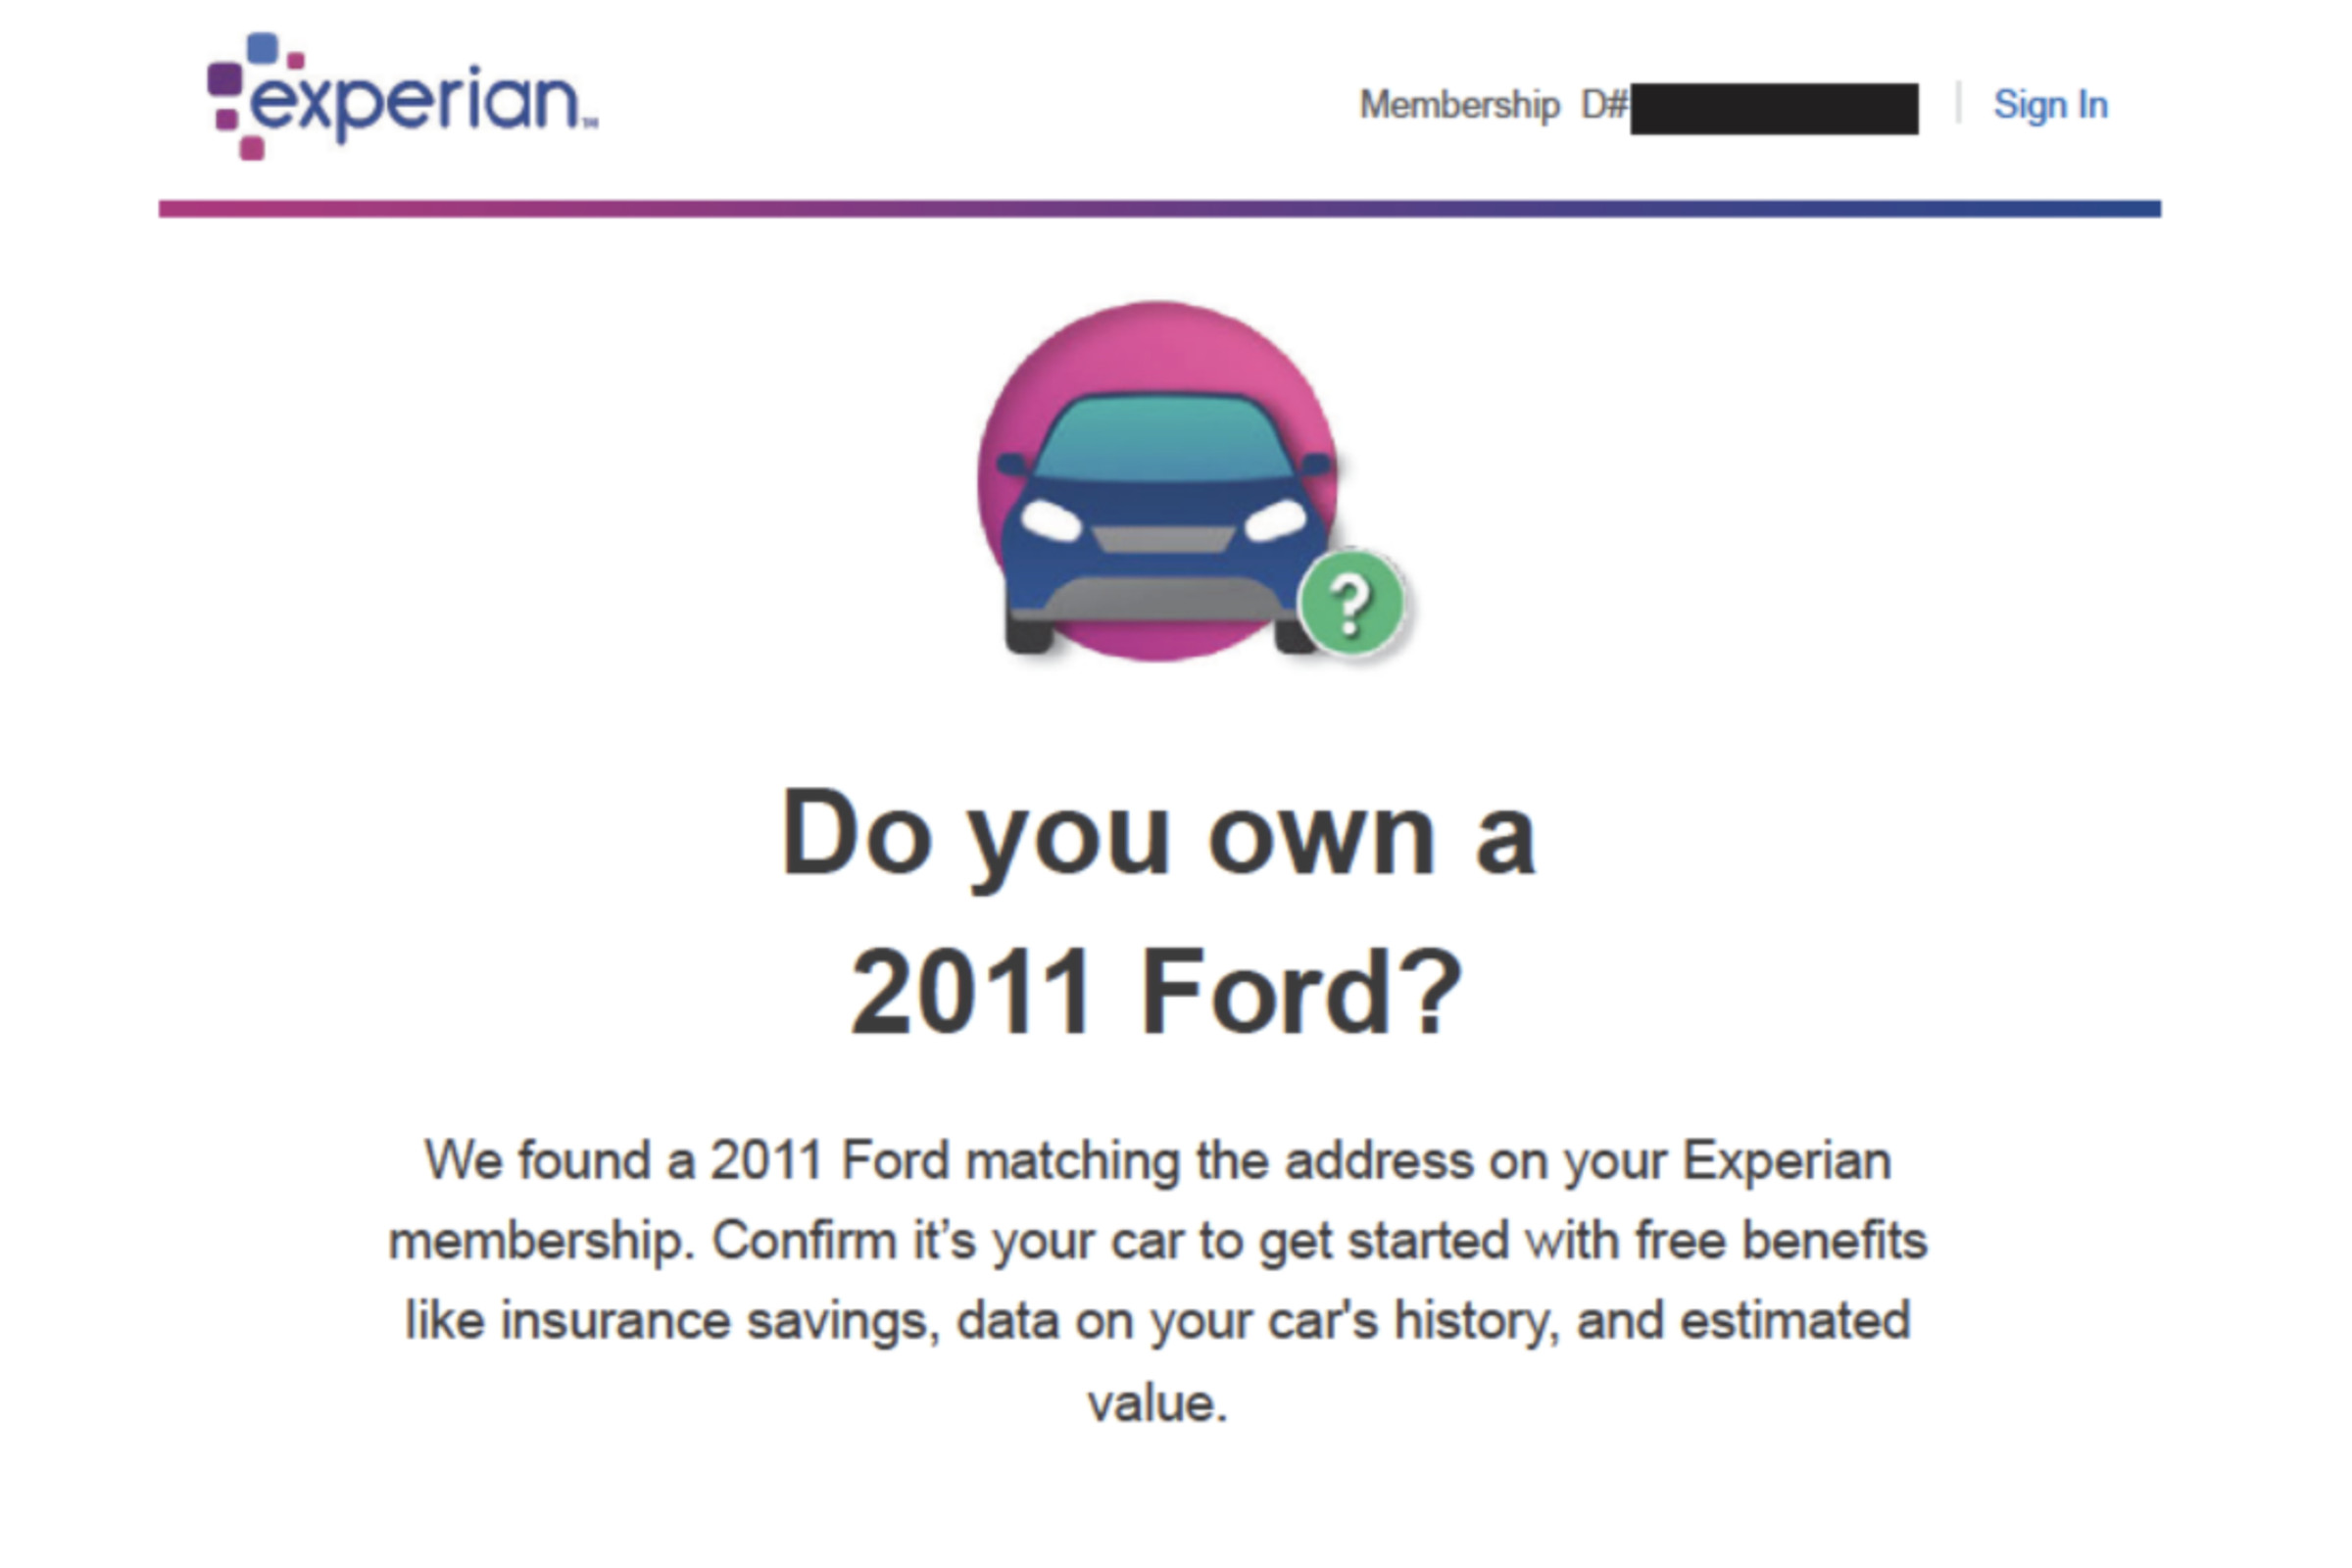 A screenshot of an Experian email with an image of a car, asking if the reader owns a 2011 Ford.